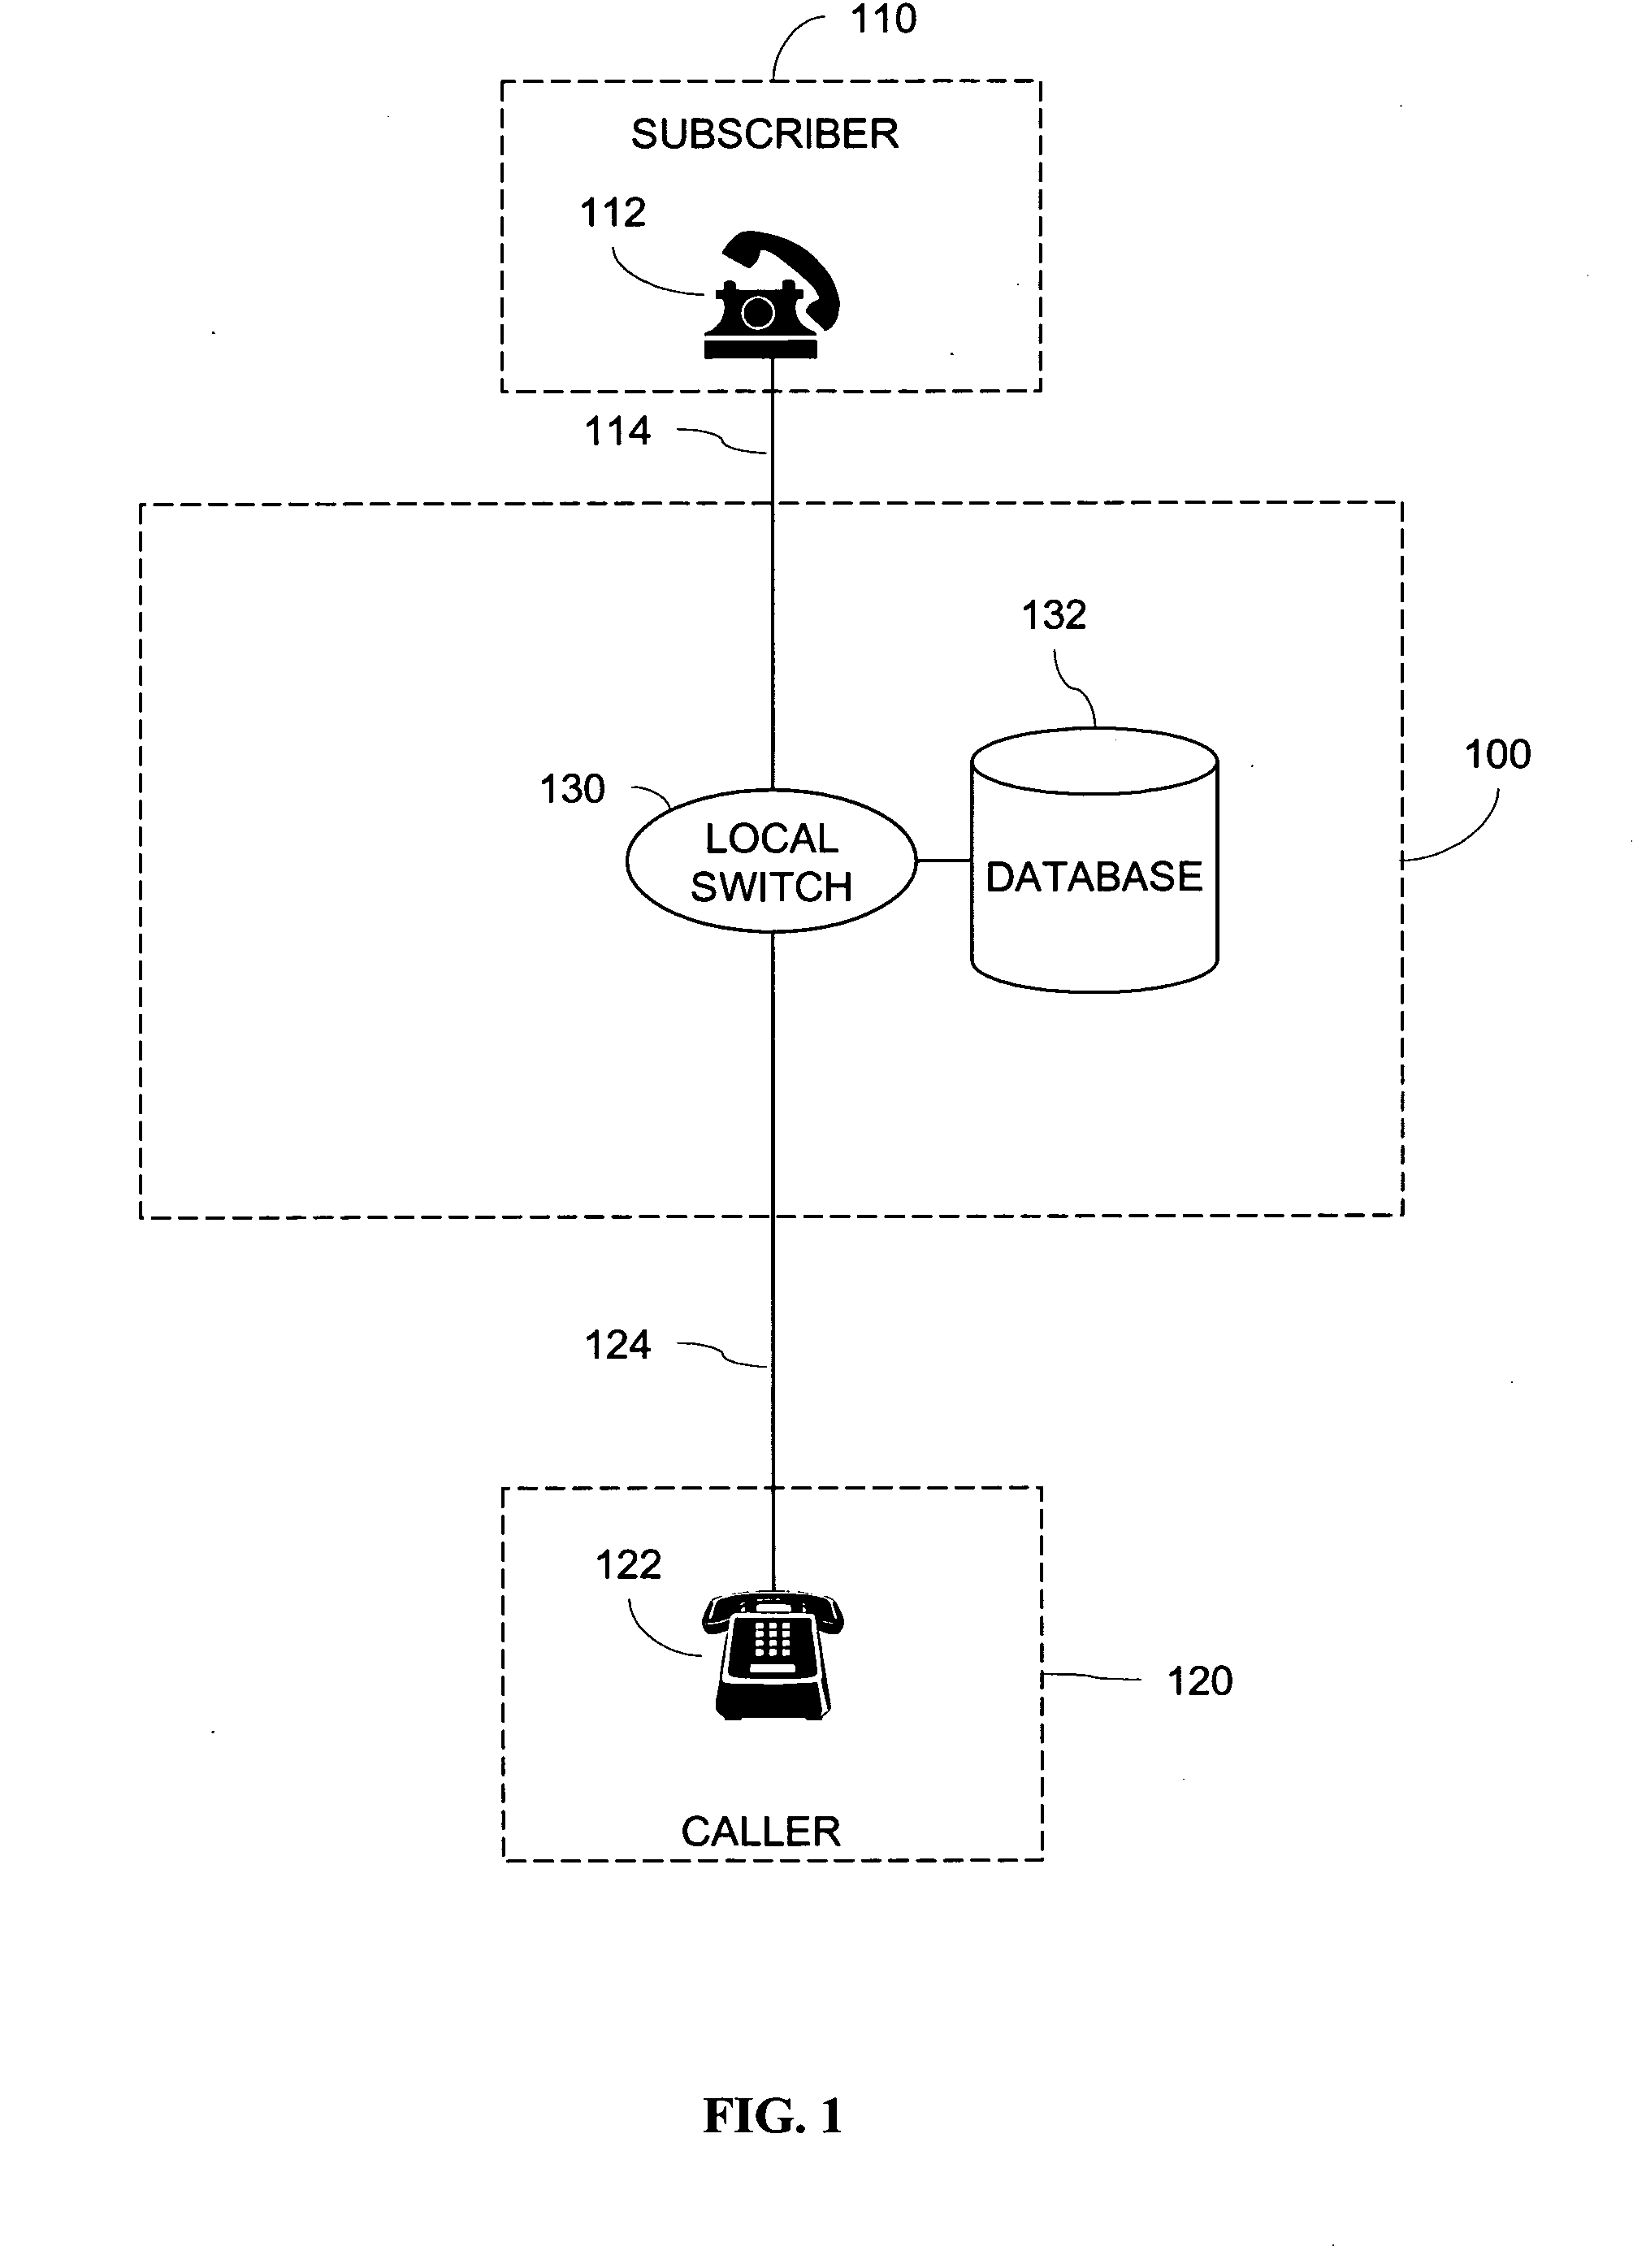 System and method for star code dialing